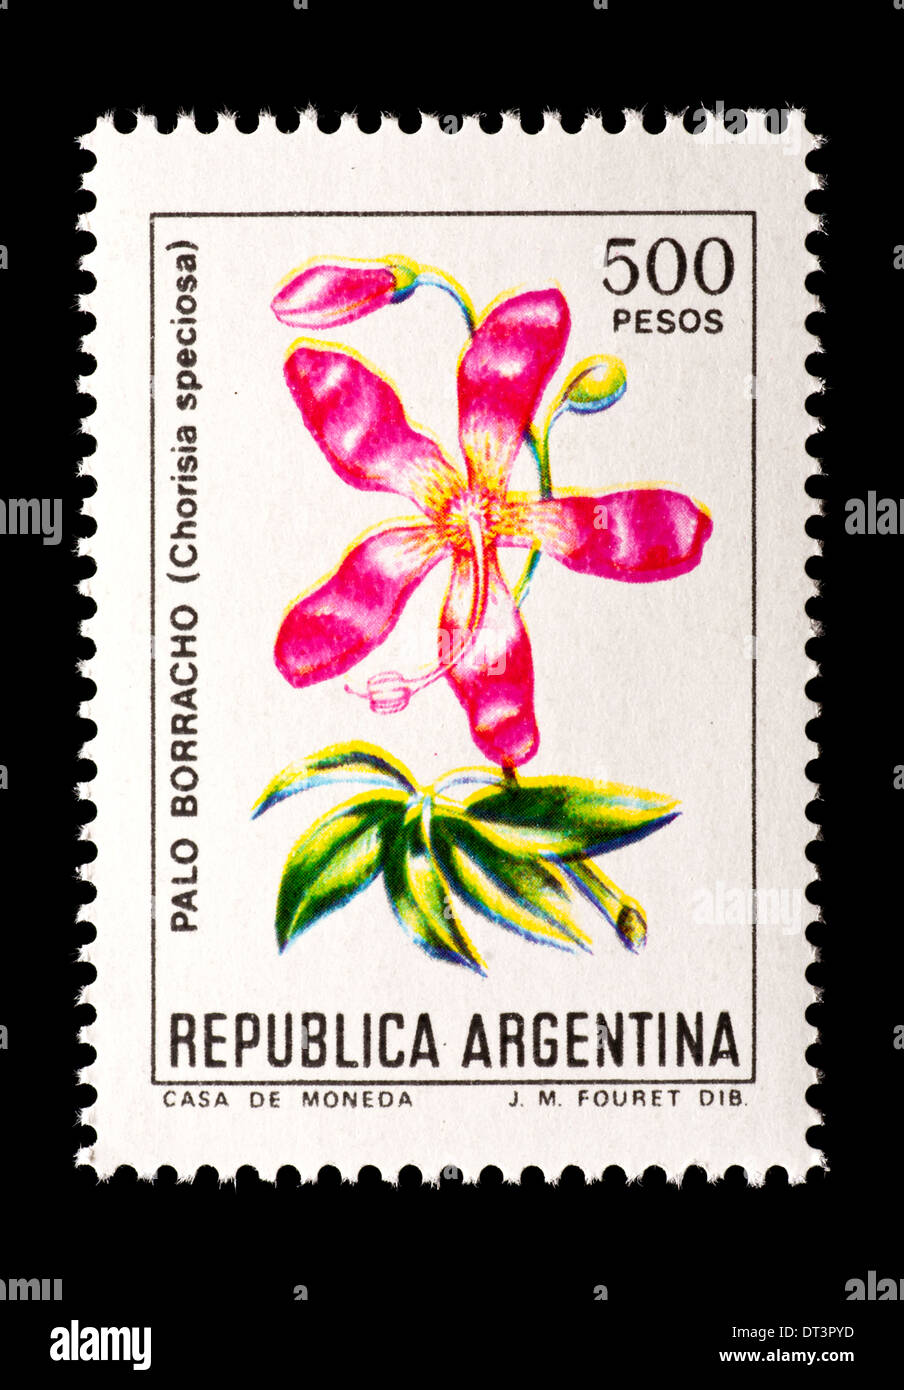 Postage stamp from Argentina depicting the flower of the silk floss tree (Chorisia speciosa). Stock Photo